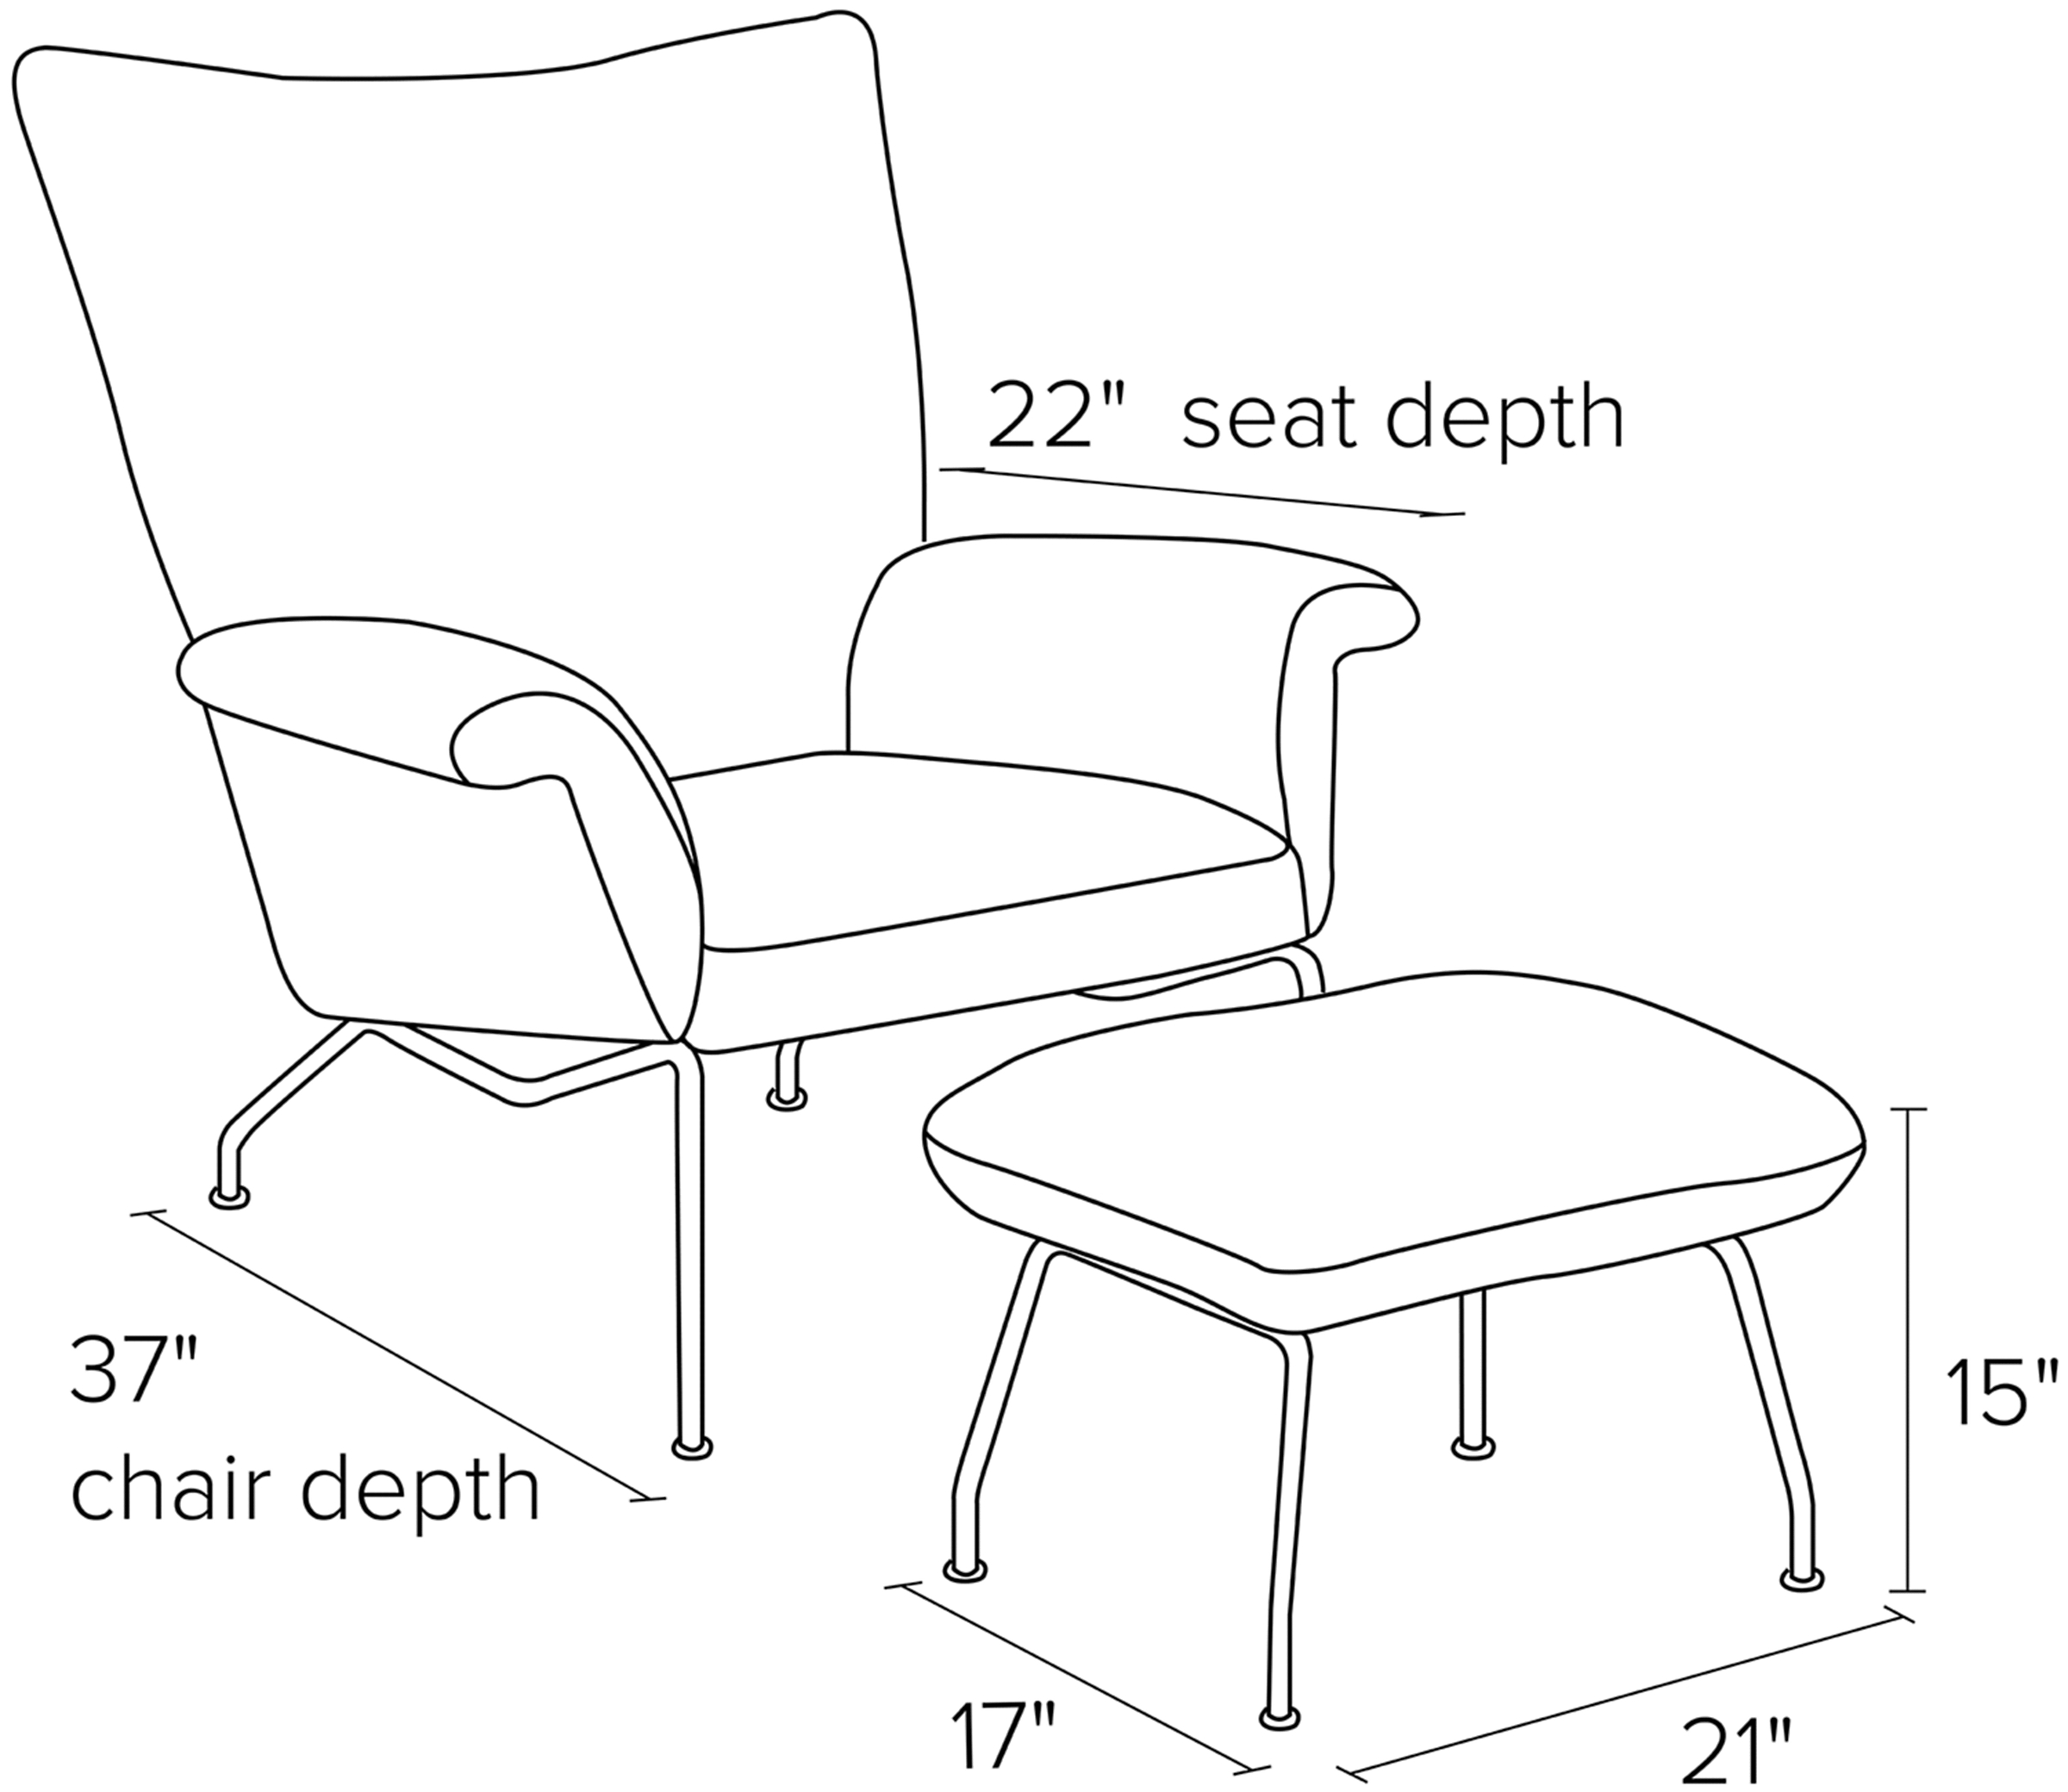 Side view dimension illustration of Paris chair and ottoman.